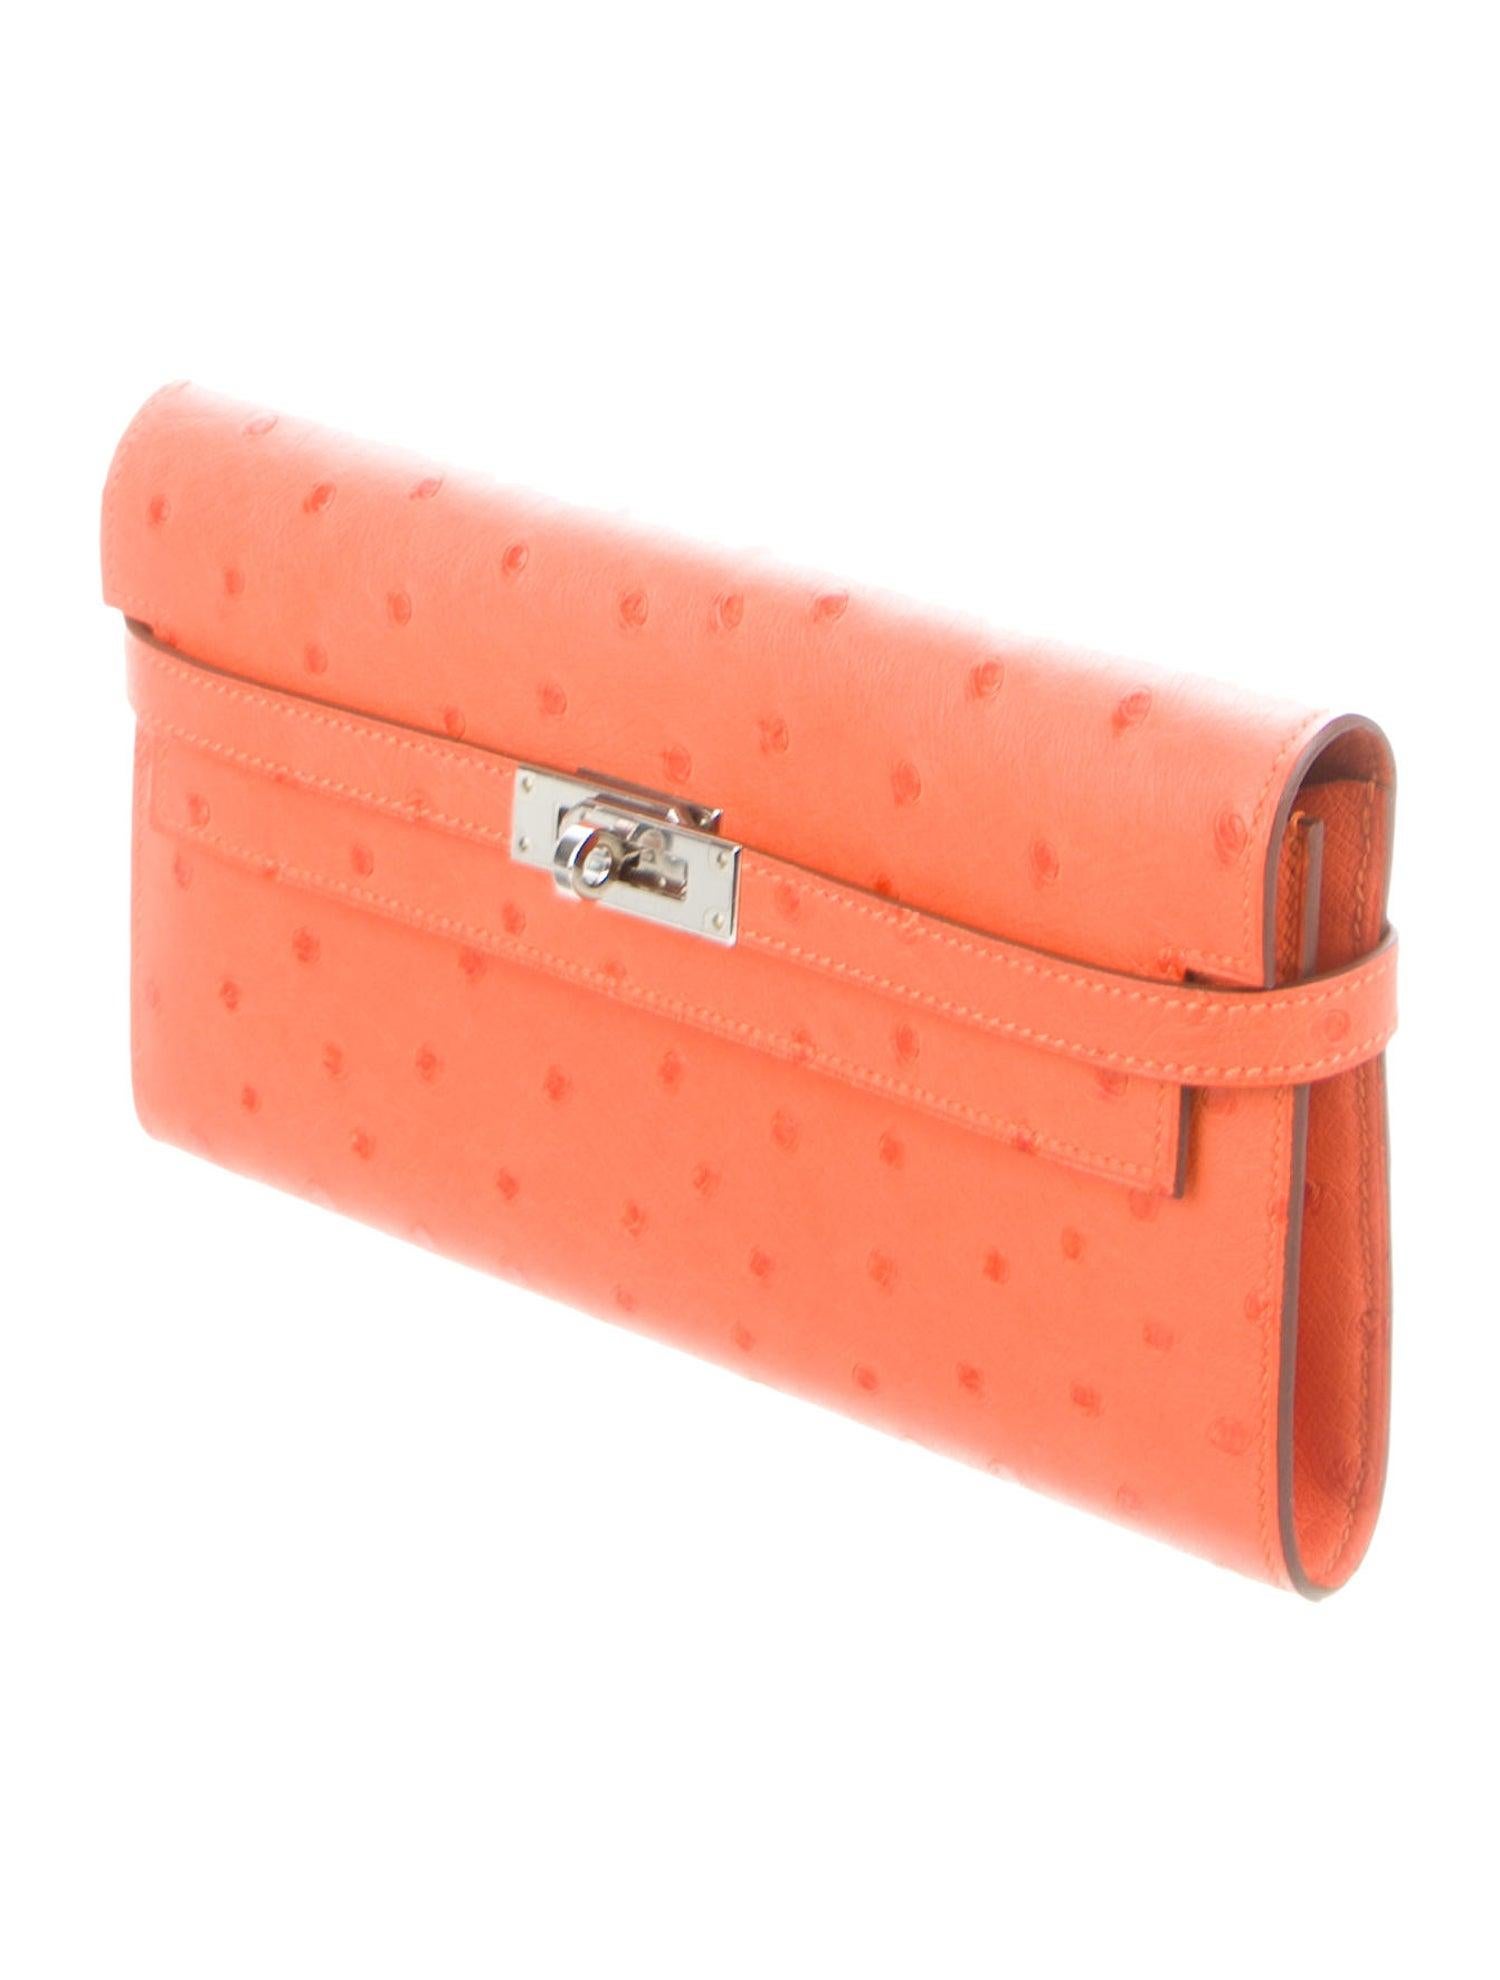 Hermes NEW Orange Ostrich Exotic Leather Kelly Palladium Evening Clutch Wallet in Box

Ostrich 
Palladium hardware
Leather lining
Turnlock closure
Features 12 card slots
Measures 8